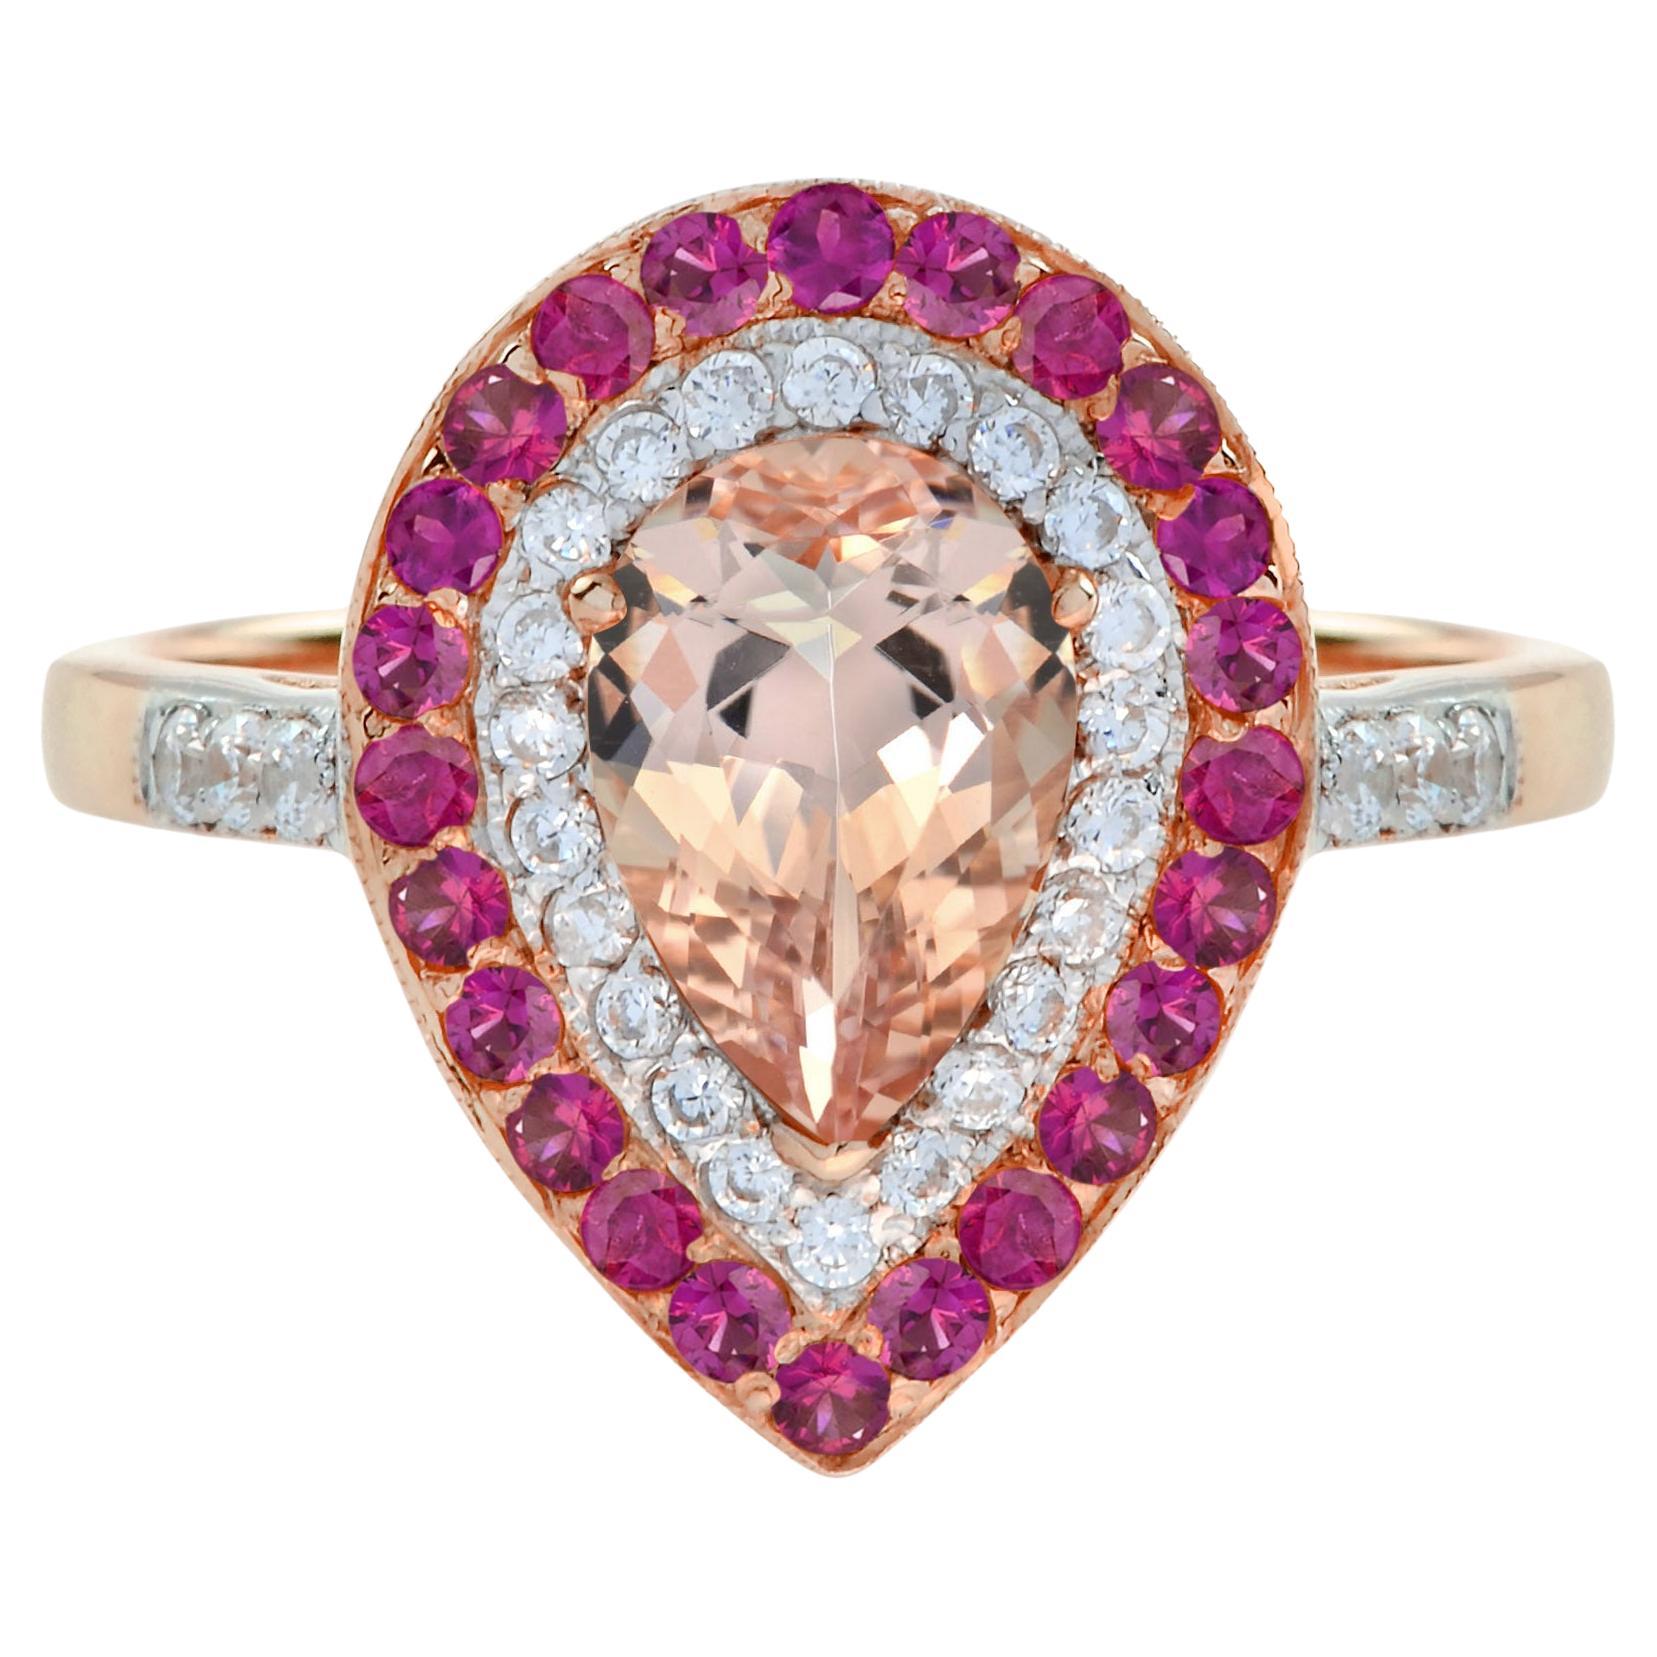 Is Morganite a good stone for an engagement ring?